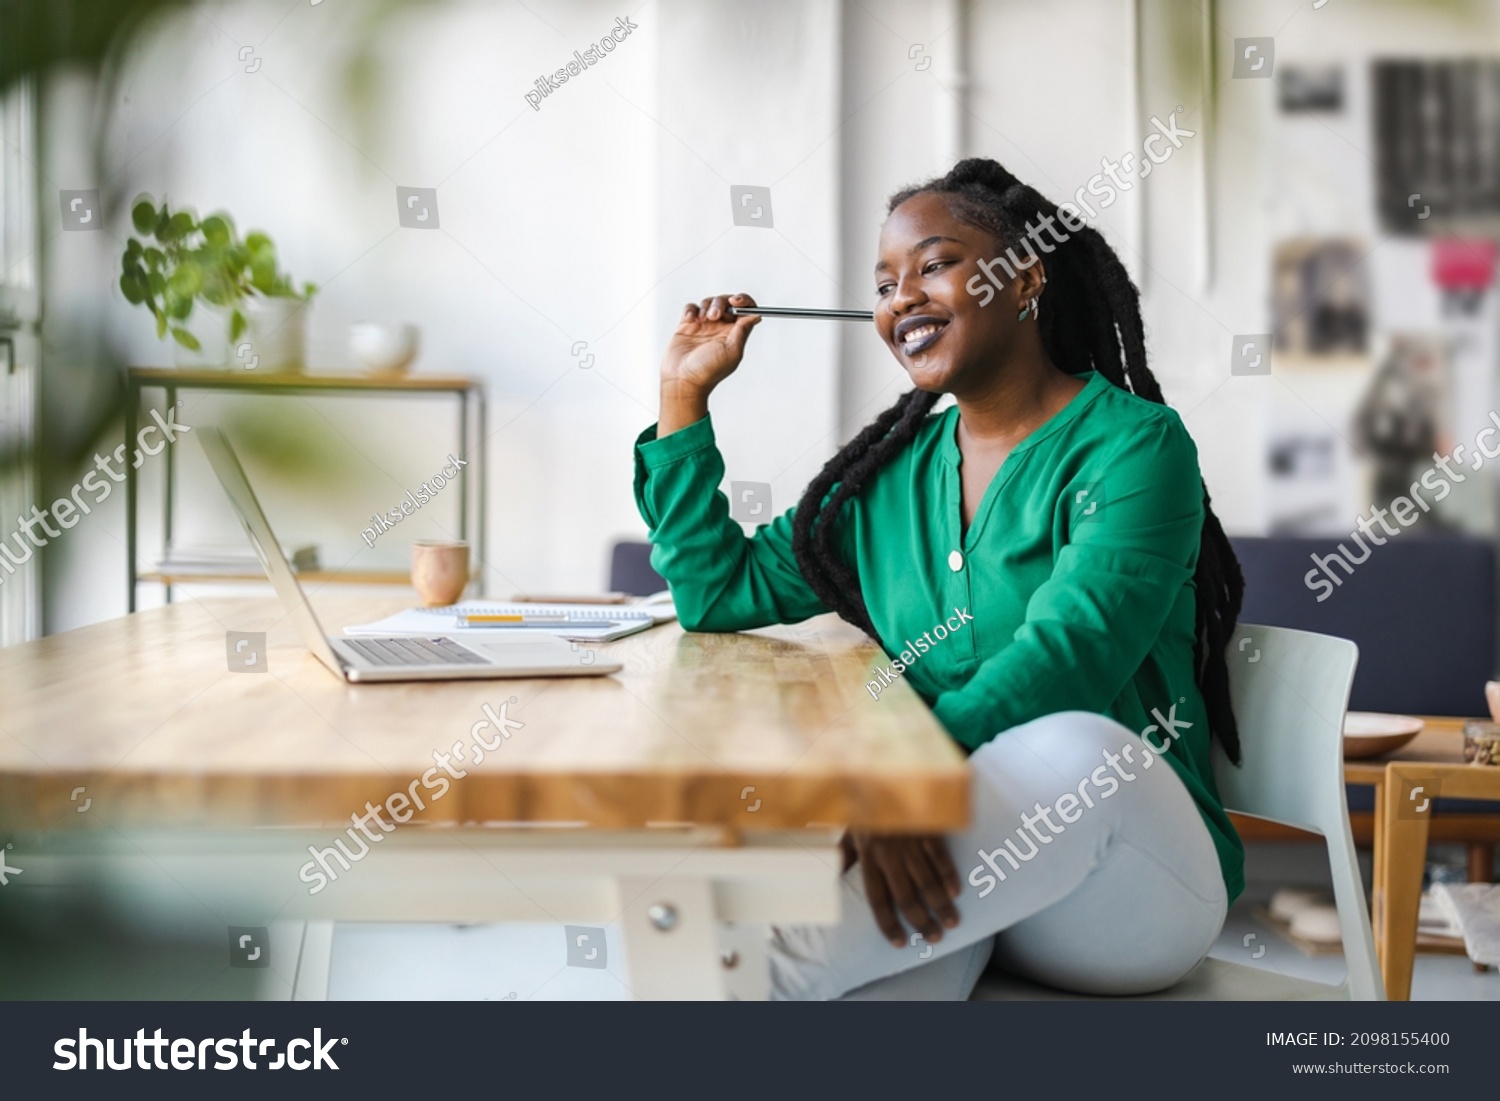 Young adult female professional working in a modern office
 #2098155400